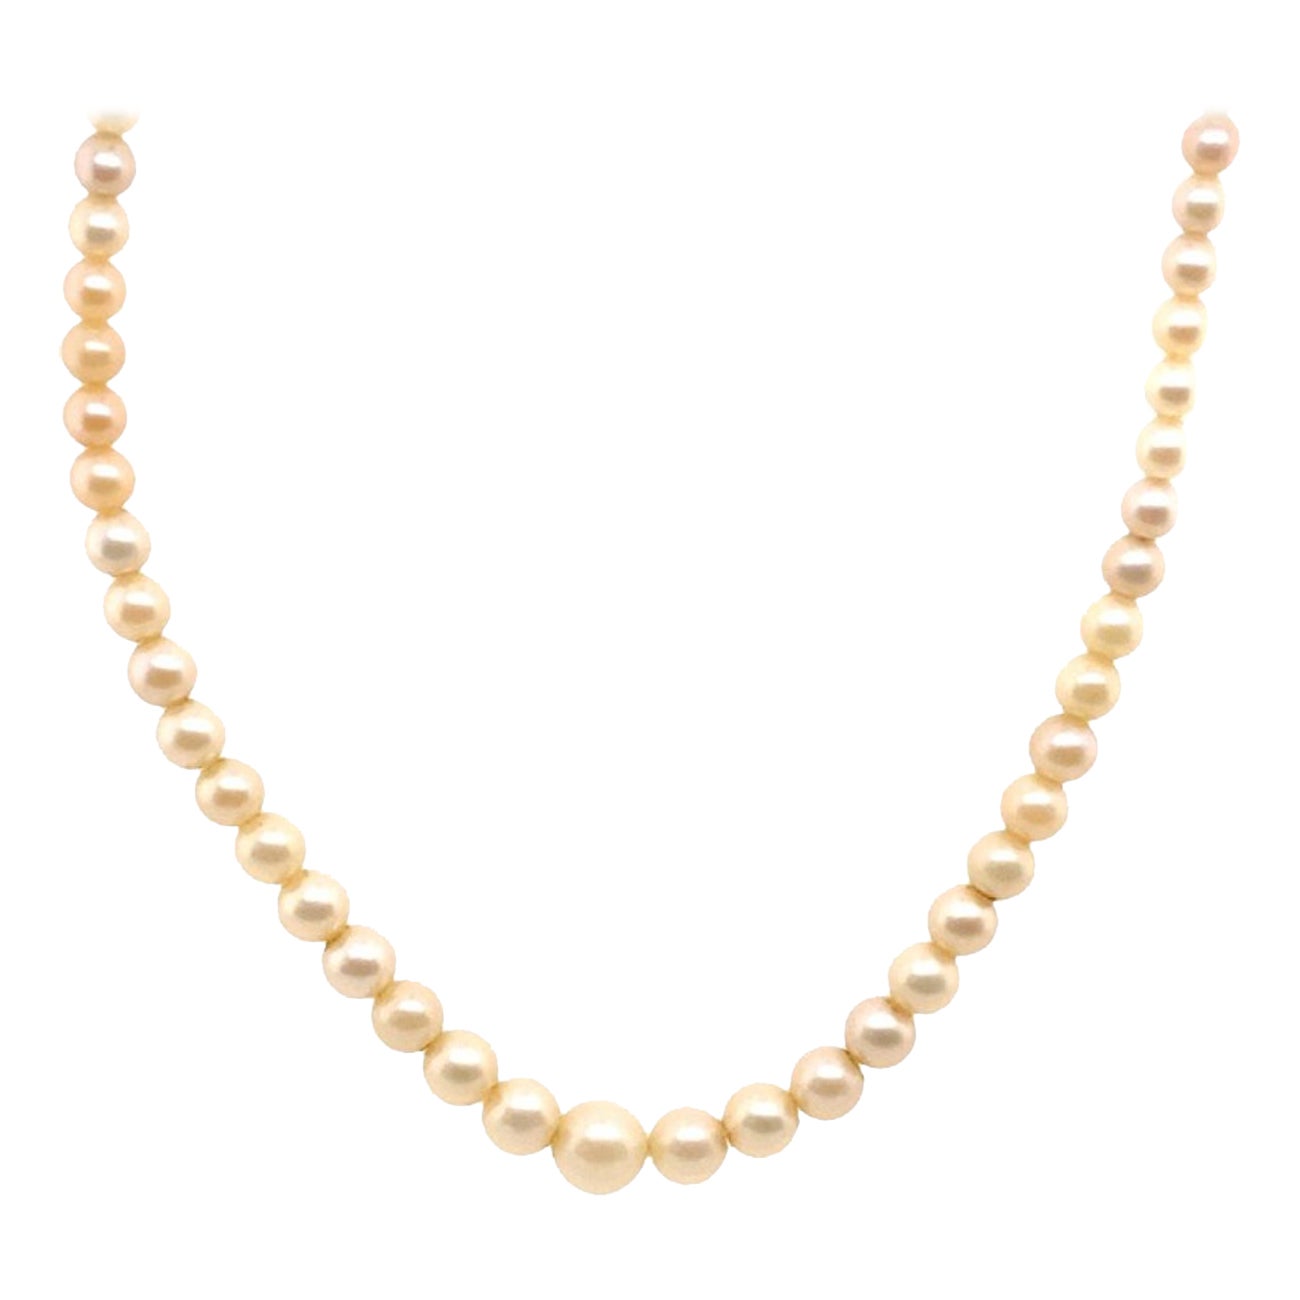 Graduated Cultured Pearl Necklace with Silver Clasp & Safety Chain For Sale